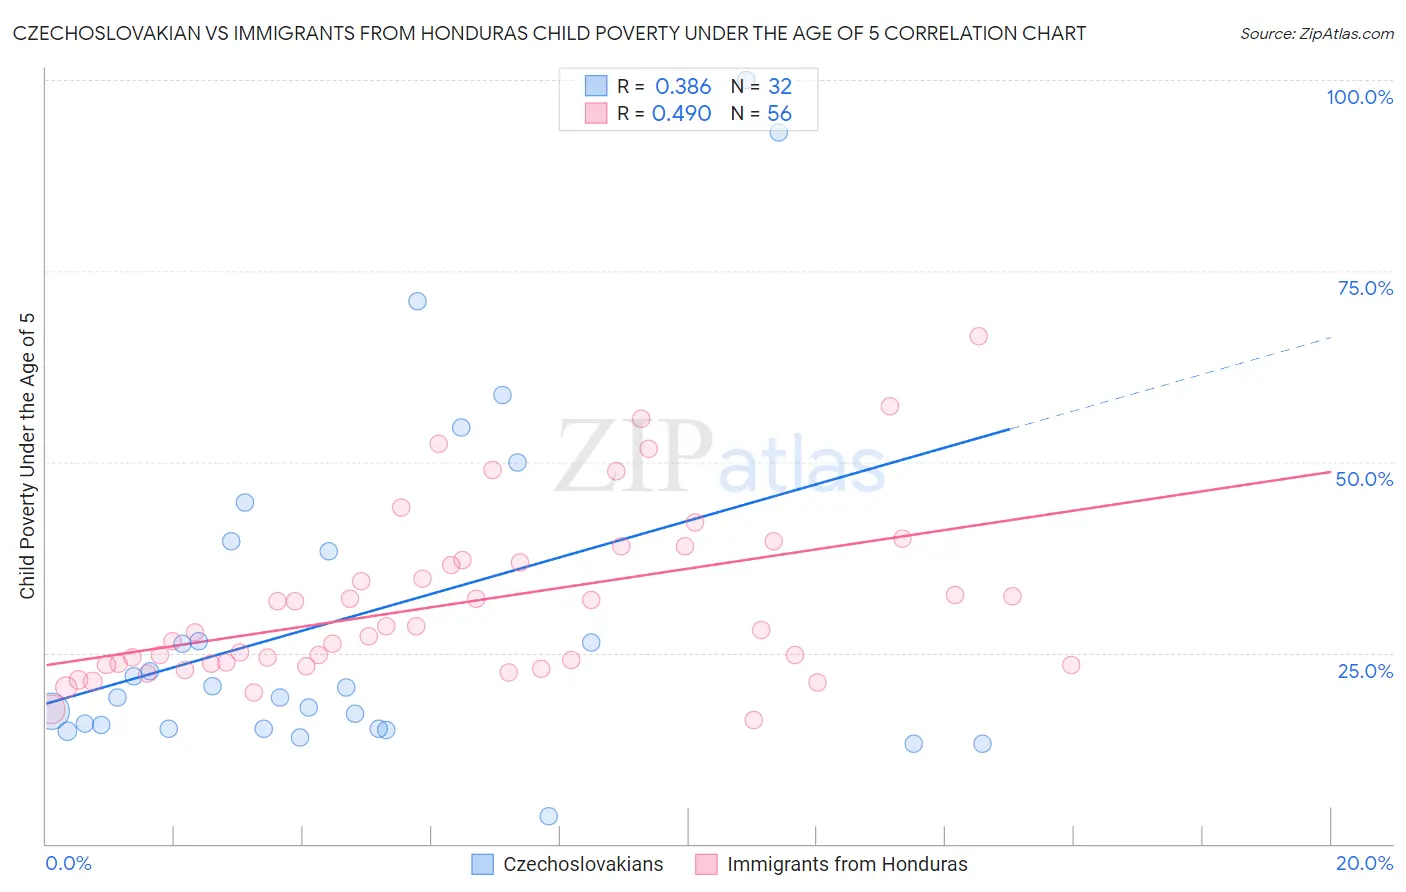 Czechoslovakian vs Immigrants from Honduras Child Poverty Under the Age of 5